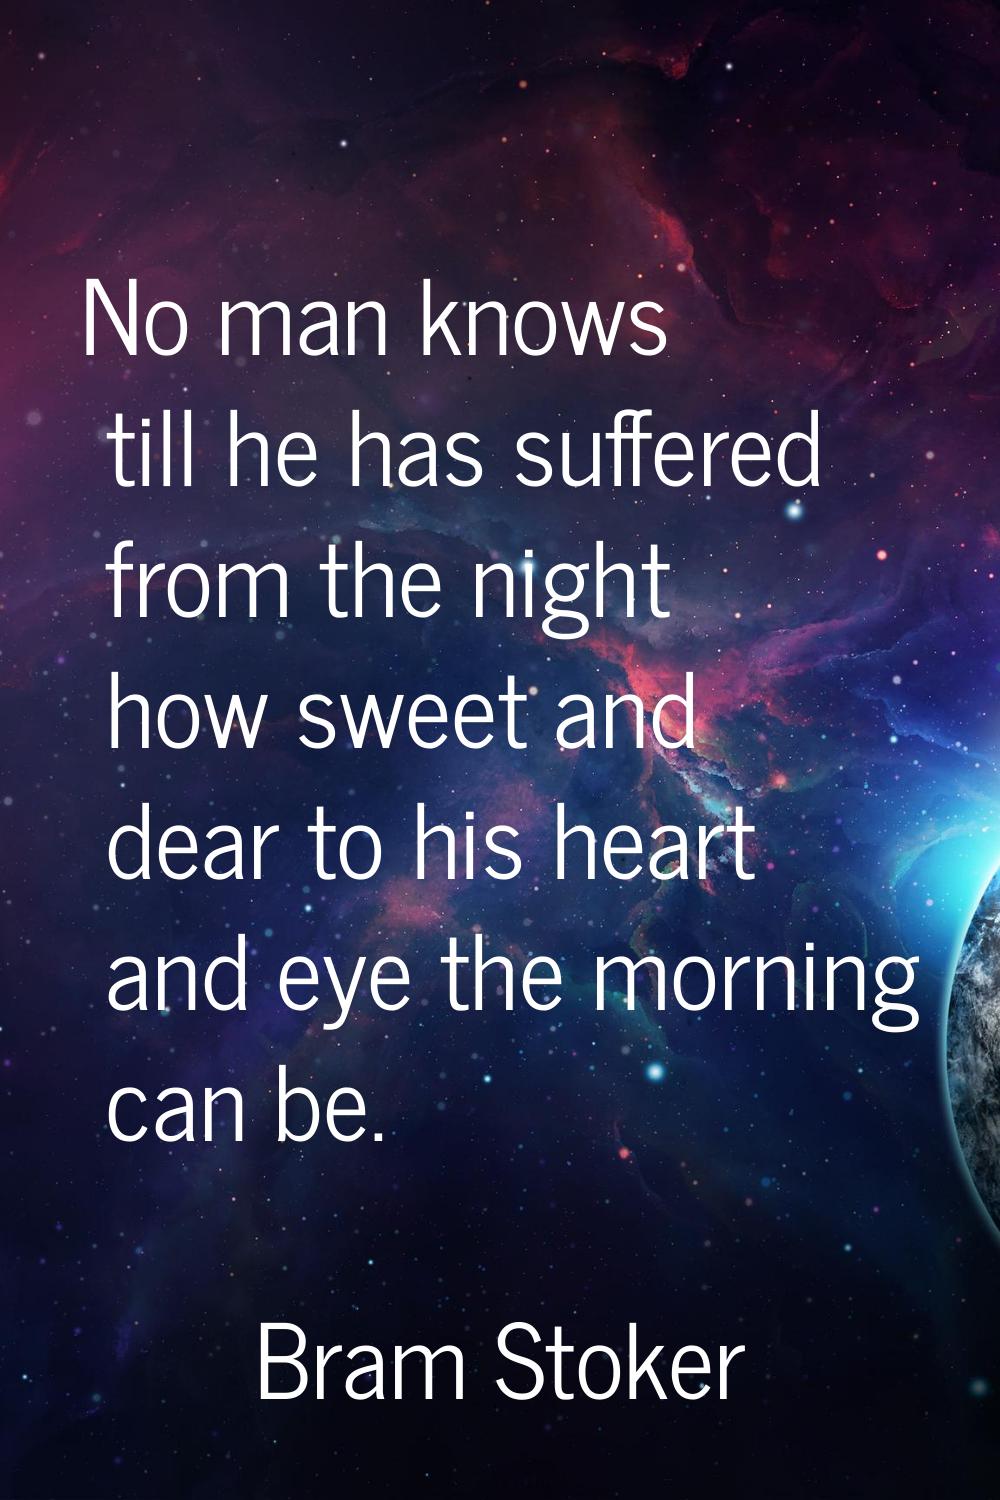 No man knows till he has suffered from the night how sweet and dear to his heart and eye the mornin